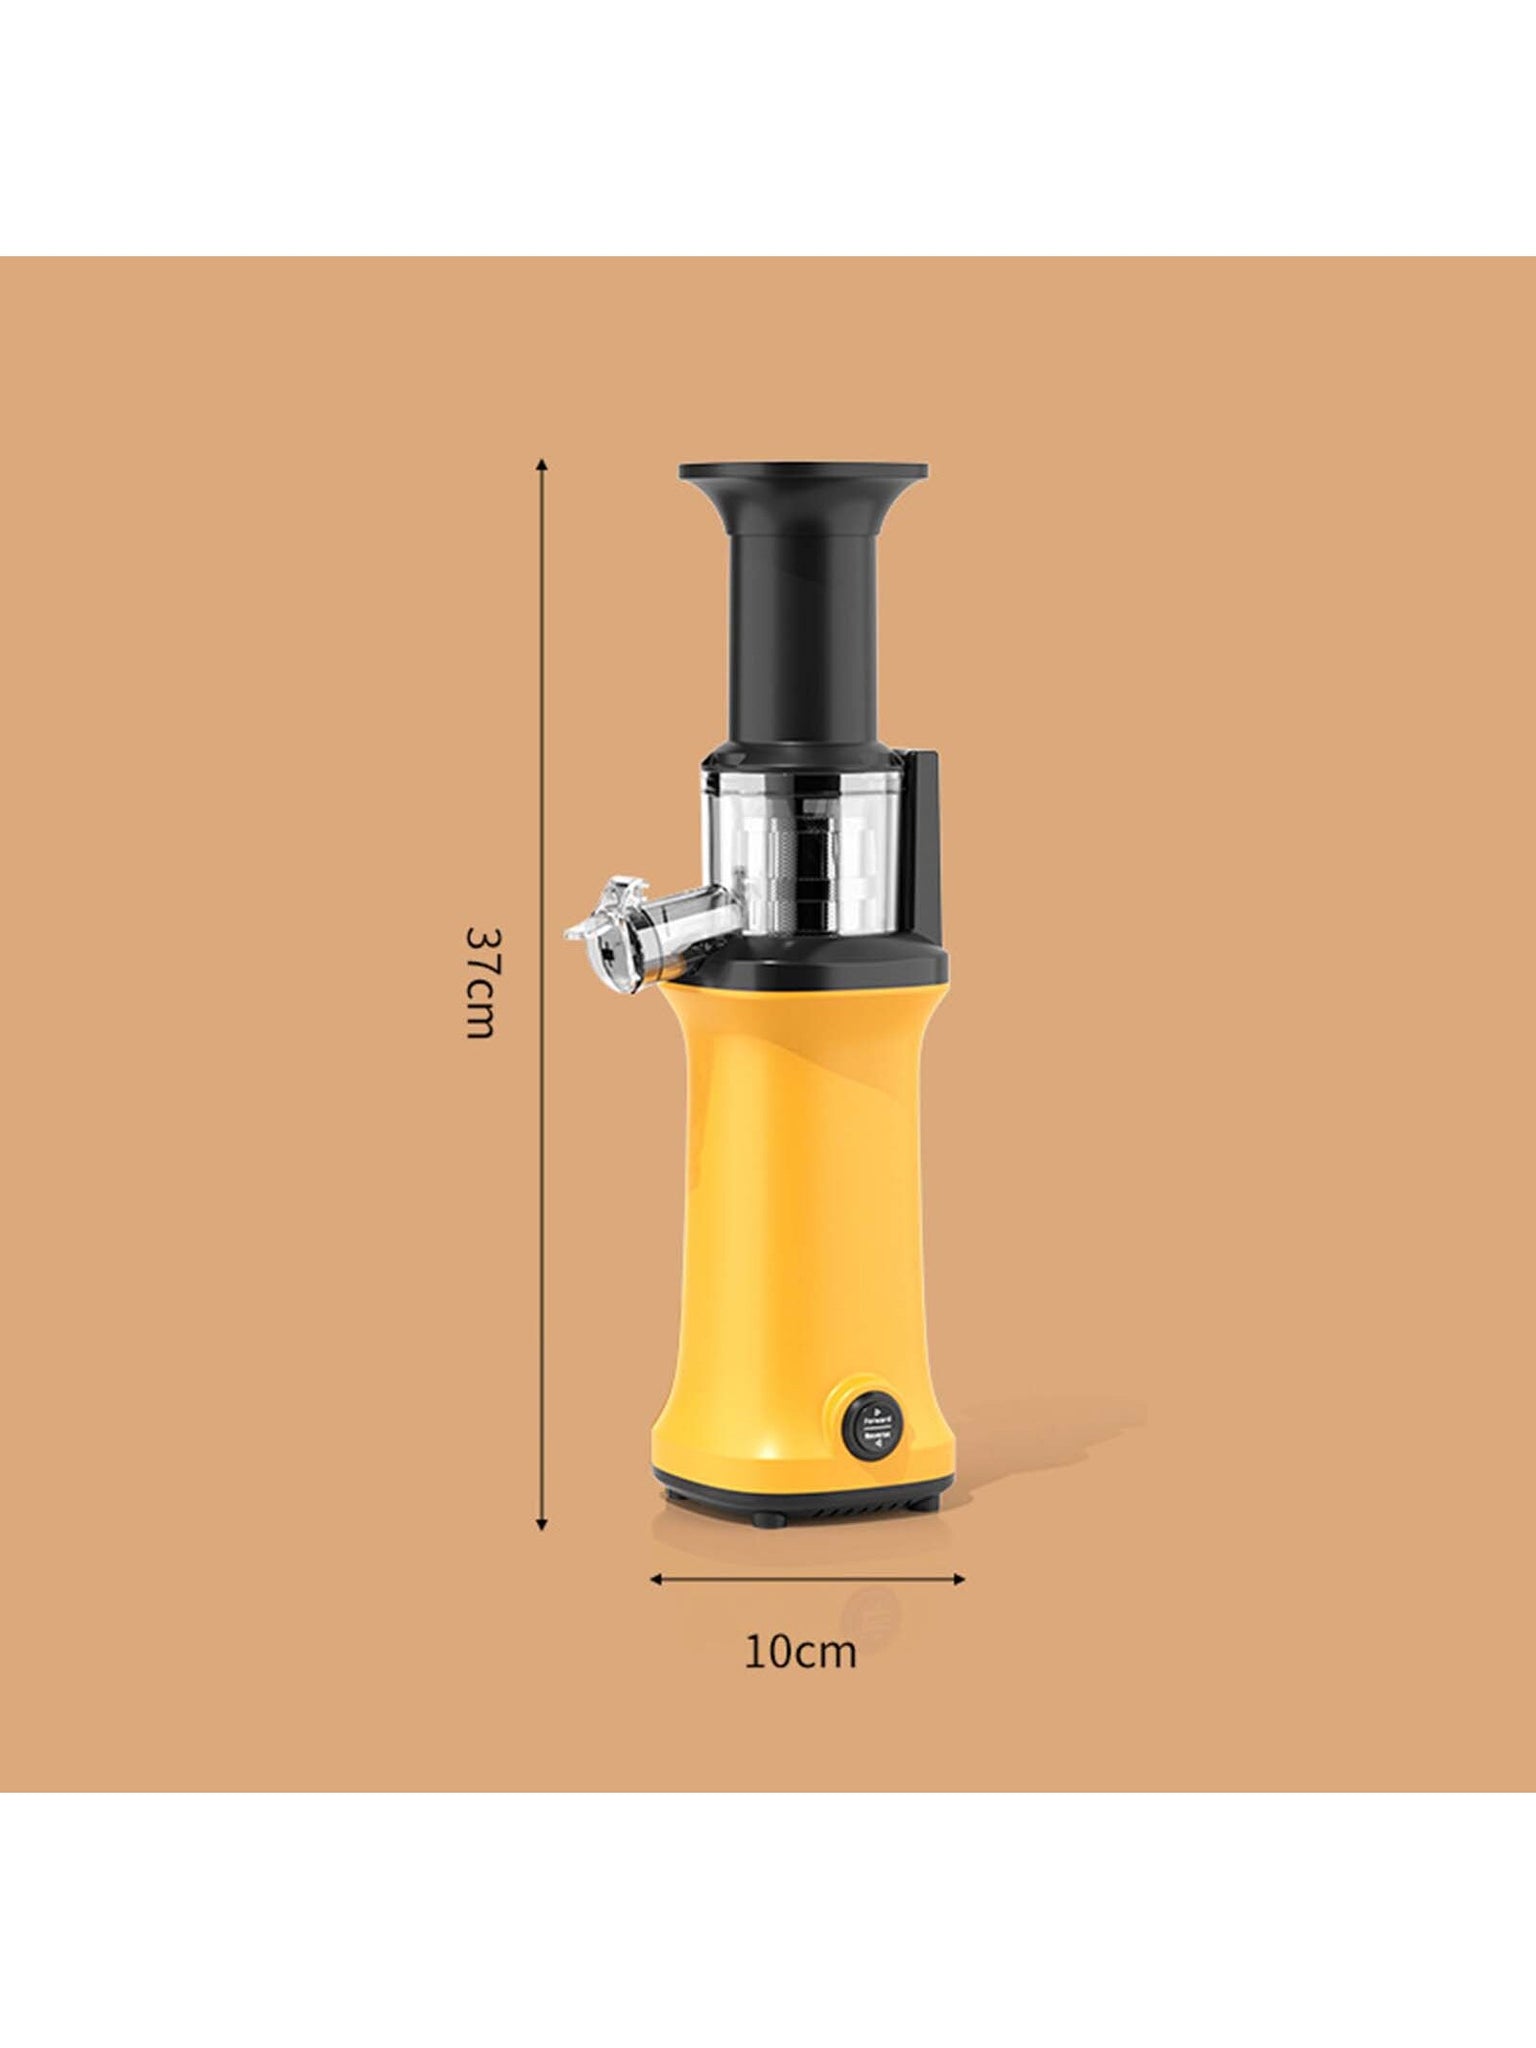 Household Fully Automatic Juice Extractor With Separated Residue And Juice-Orange-7